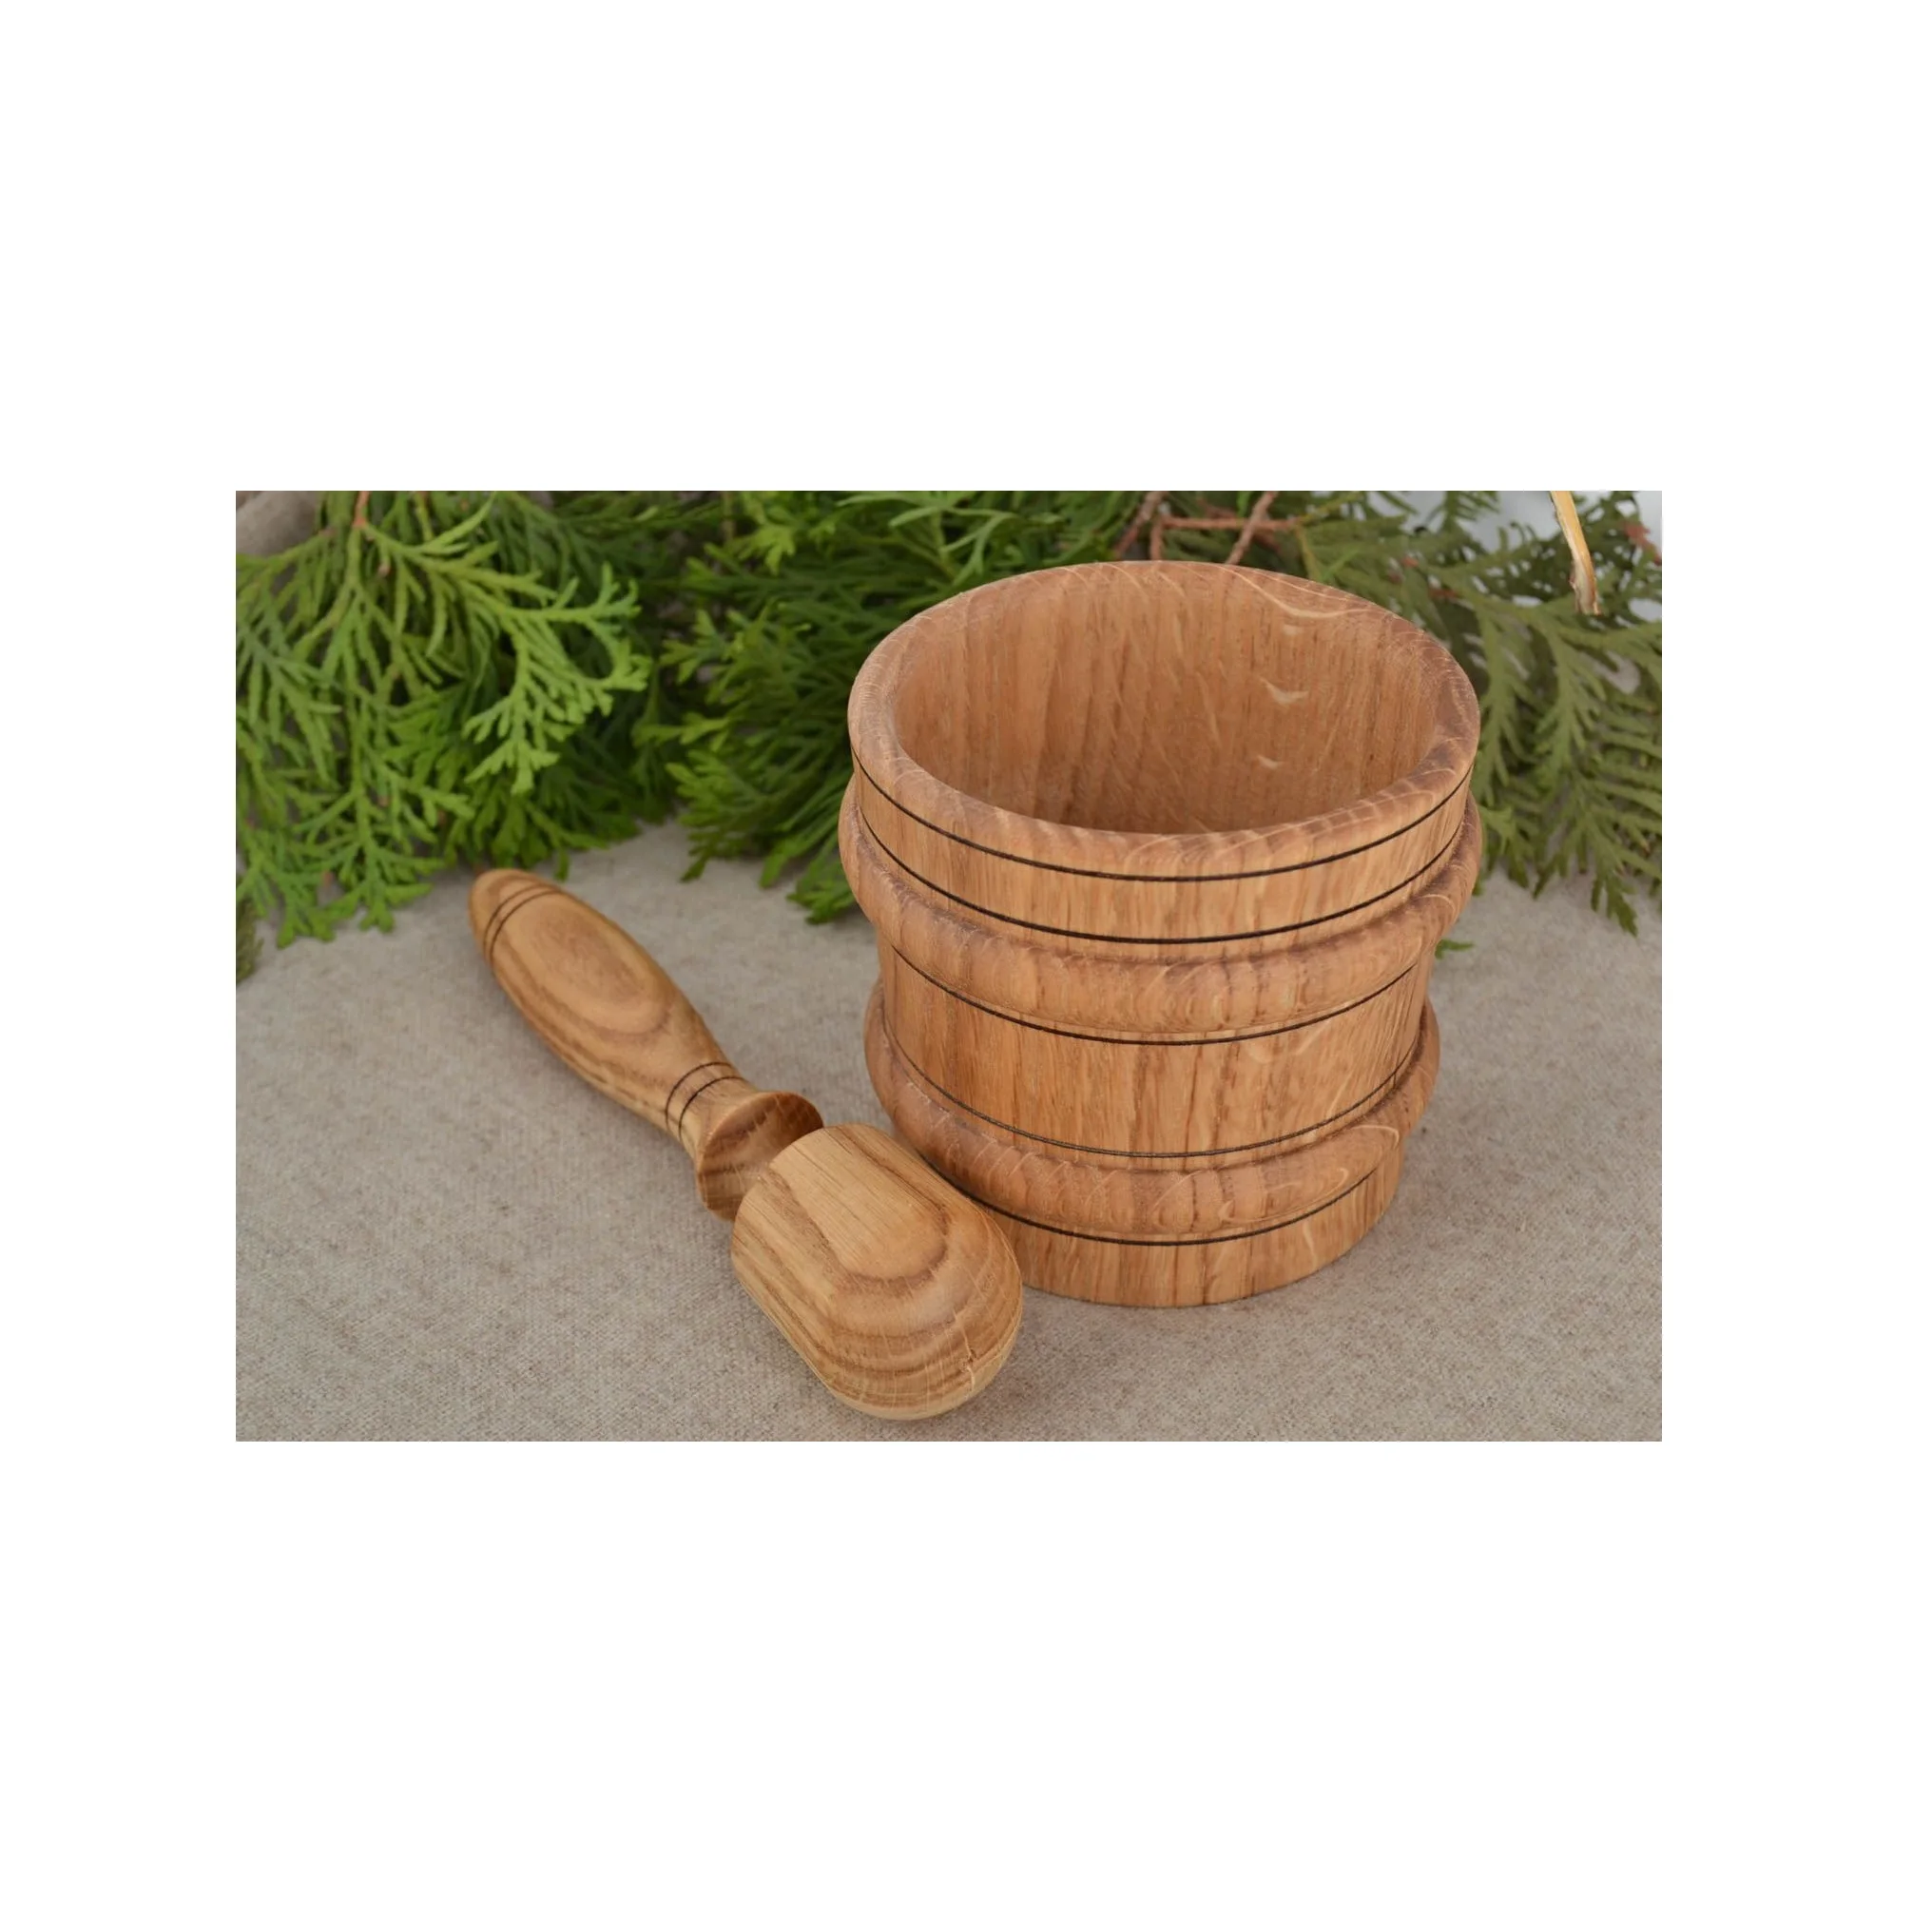 Wooden Mortal Pestle Product Customized Design Wooden Mortal And Pestle Garlic Press Set Press Garlic for selling